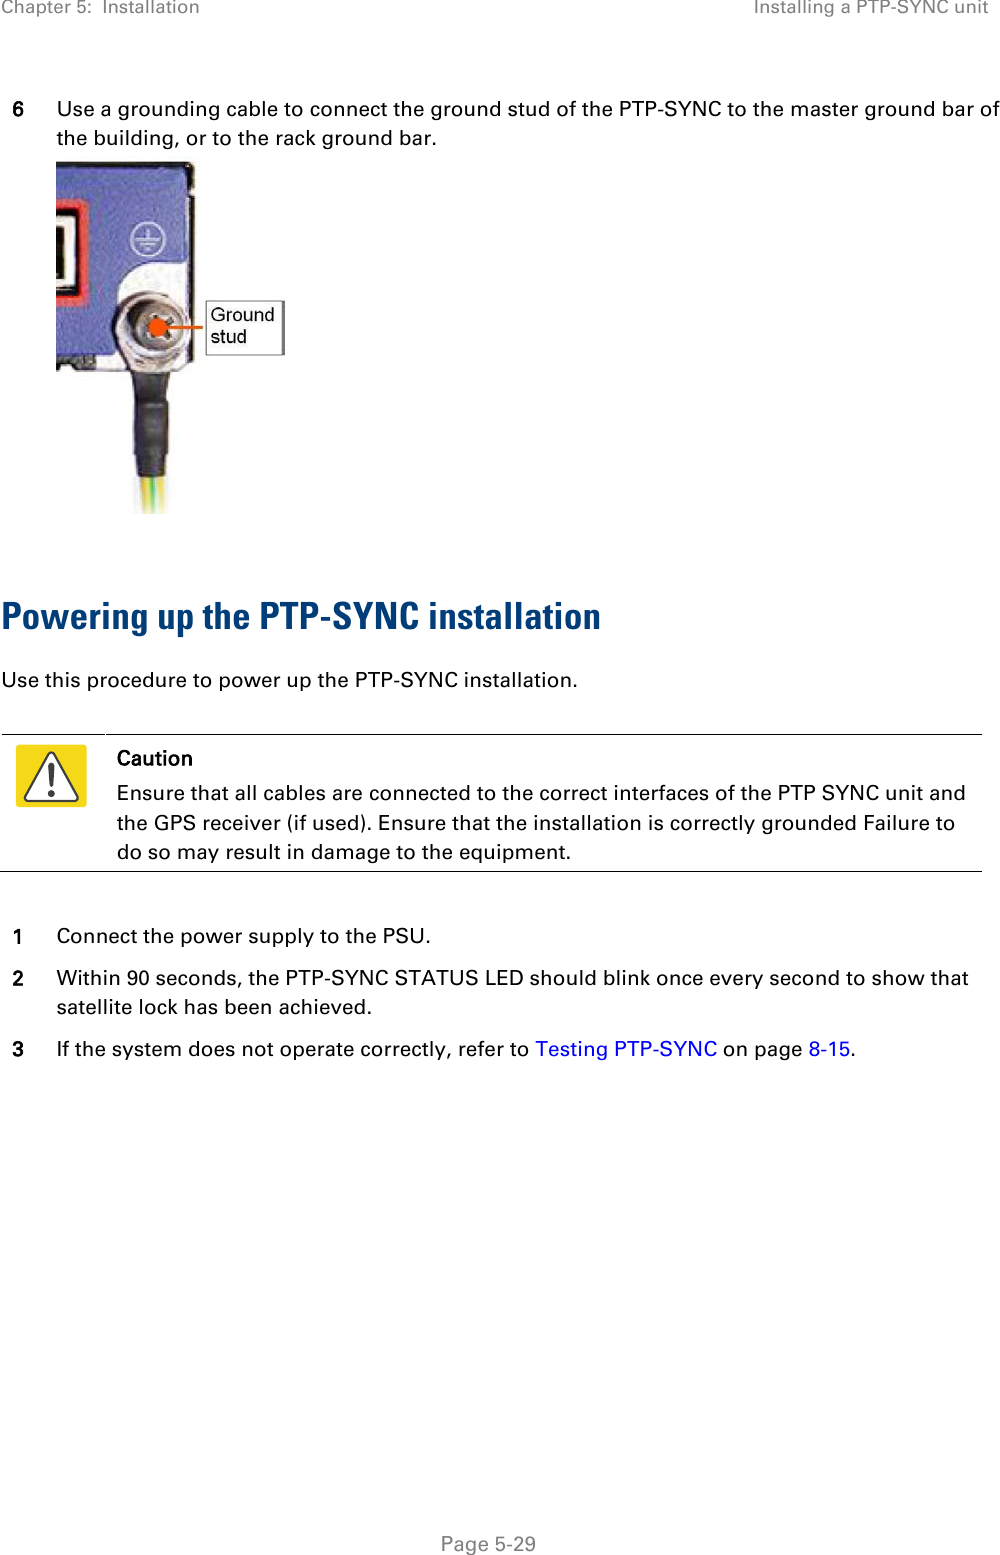 Chapter 5:  Installation Installing a PTP-SYNC unit  6 Use a grounding cable to connect the ground stud of the PTP-SYNC to the master ground bar of the building, or to the rack ground bar.   Powering up the PTP-SYNC installation Use this procedure to power up the PTP-SYNC installation.   Caution Ensure that all cables are connected to the correct interfaces of the PTP SYNC unit and the GPS receiver (if used). Ensure that the installation is correctly grounded Failure to do so may result in damage to the equipment.  1 Connect the power supply to the PSU. 2 Within 90 seconds, the PTP-SYNC STATUS LED should blink once every second to show that satellite lock has been achieved. 3 If the system does not operate correctly, refer to Testing PTP-SYNC on page 8-15.  Page 5-29 